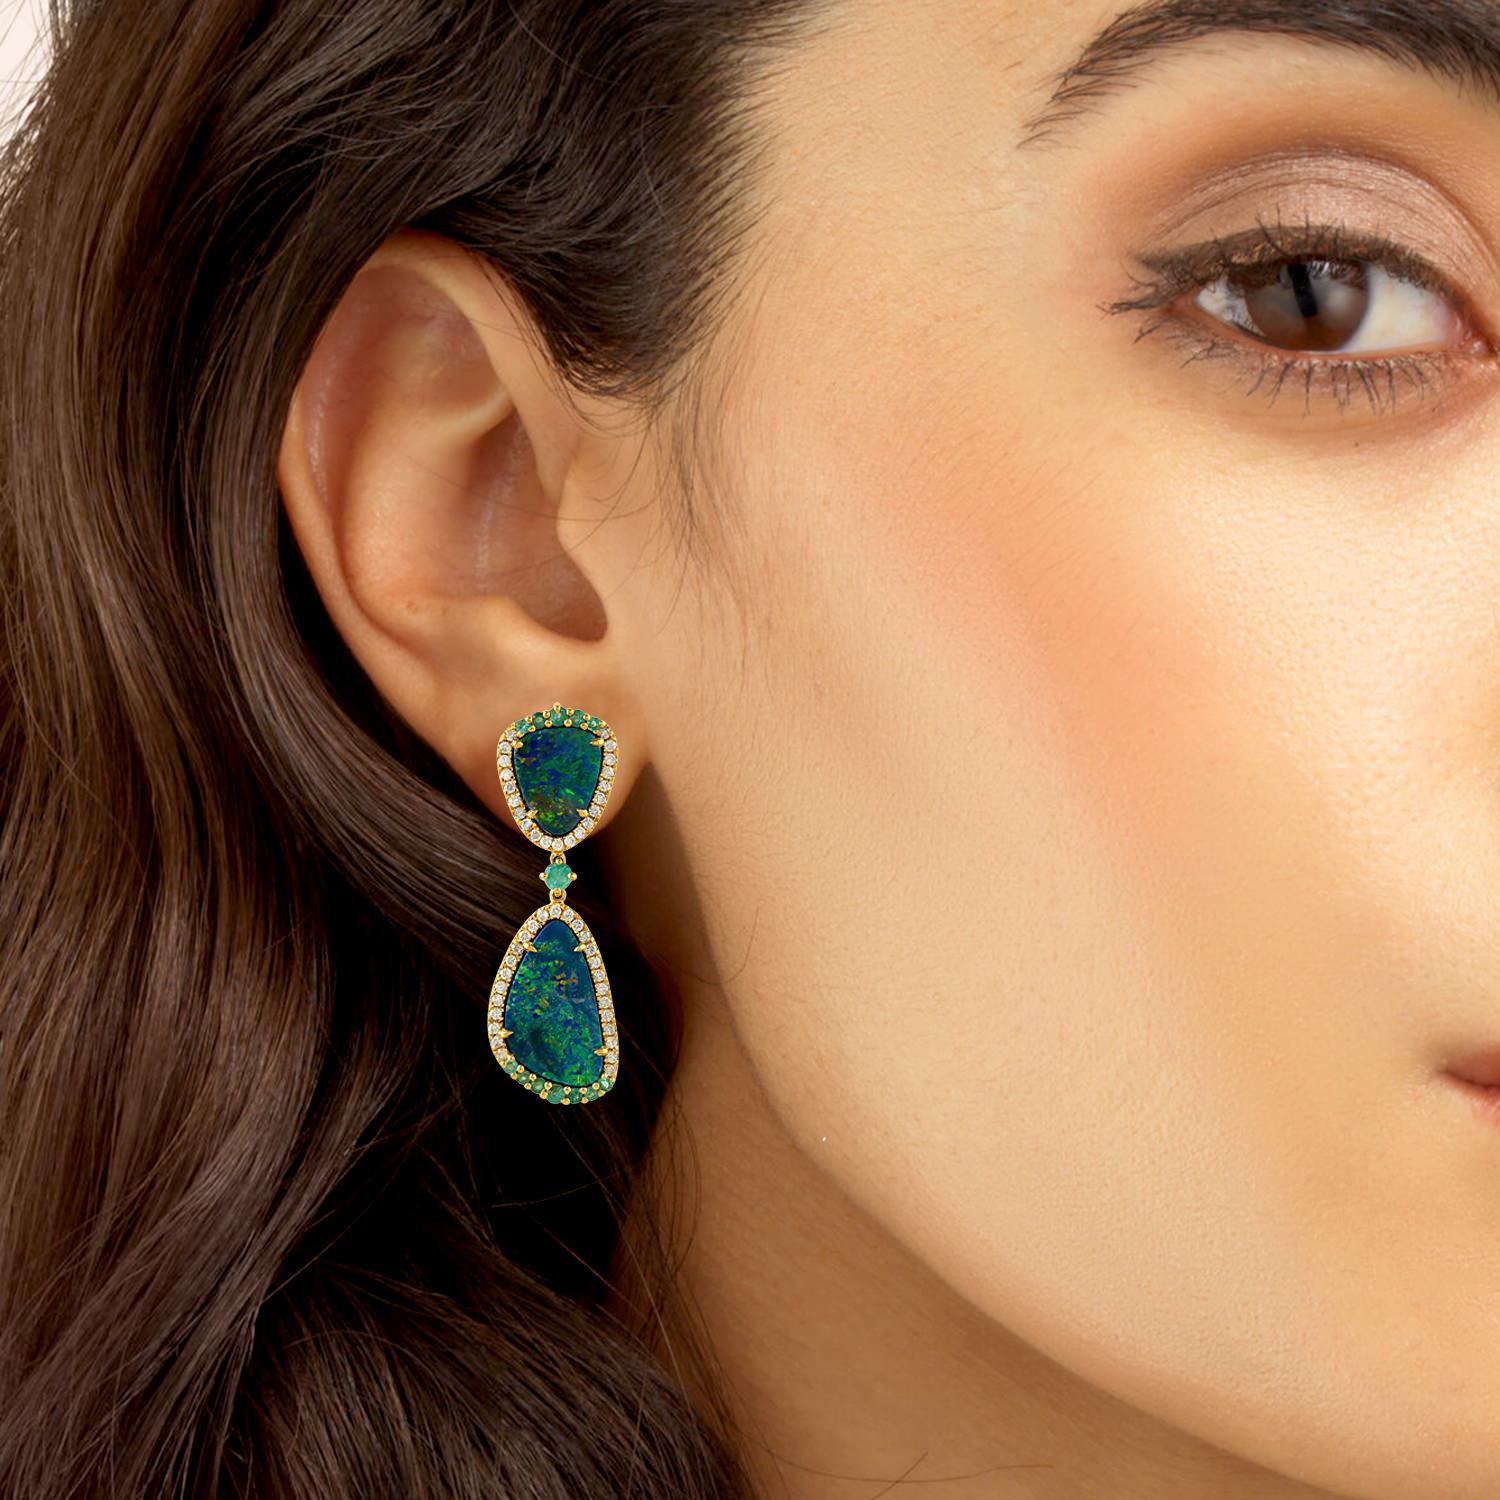 Handcrafted from 18-karat gold, these drop earrings are set with 7.33 carats Opal doublets, .80 carats emerald and .62 carats of glimmering diamonds. 

FOLLOW MEGHNA JEWELS storefront to view the latest collection & exclusive pieces. Meghna Jewels